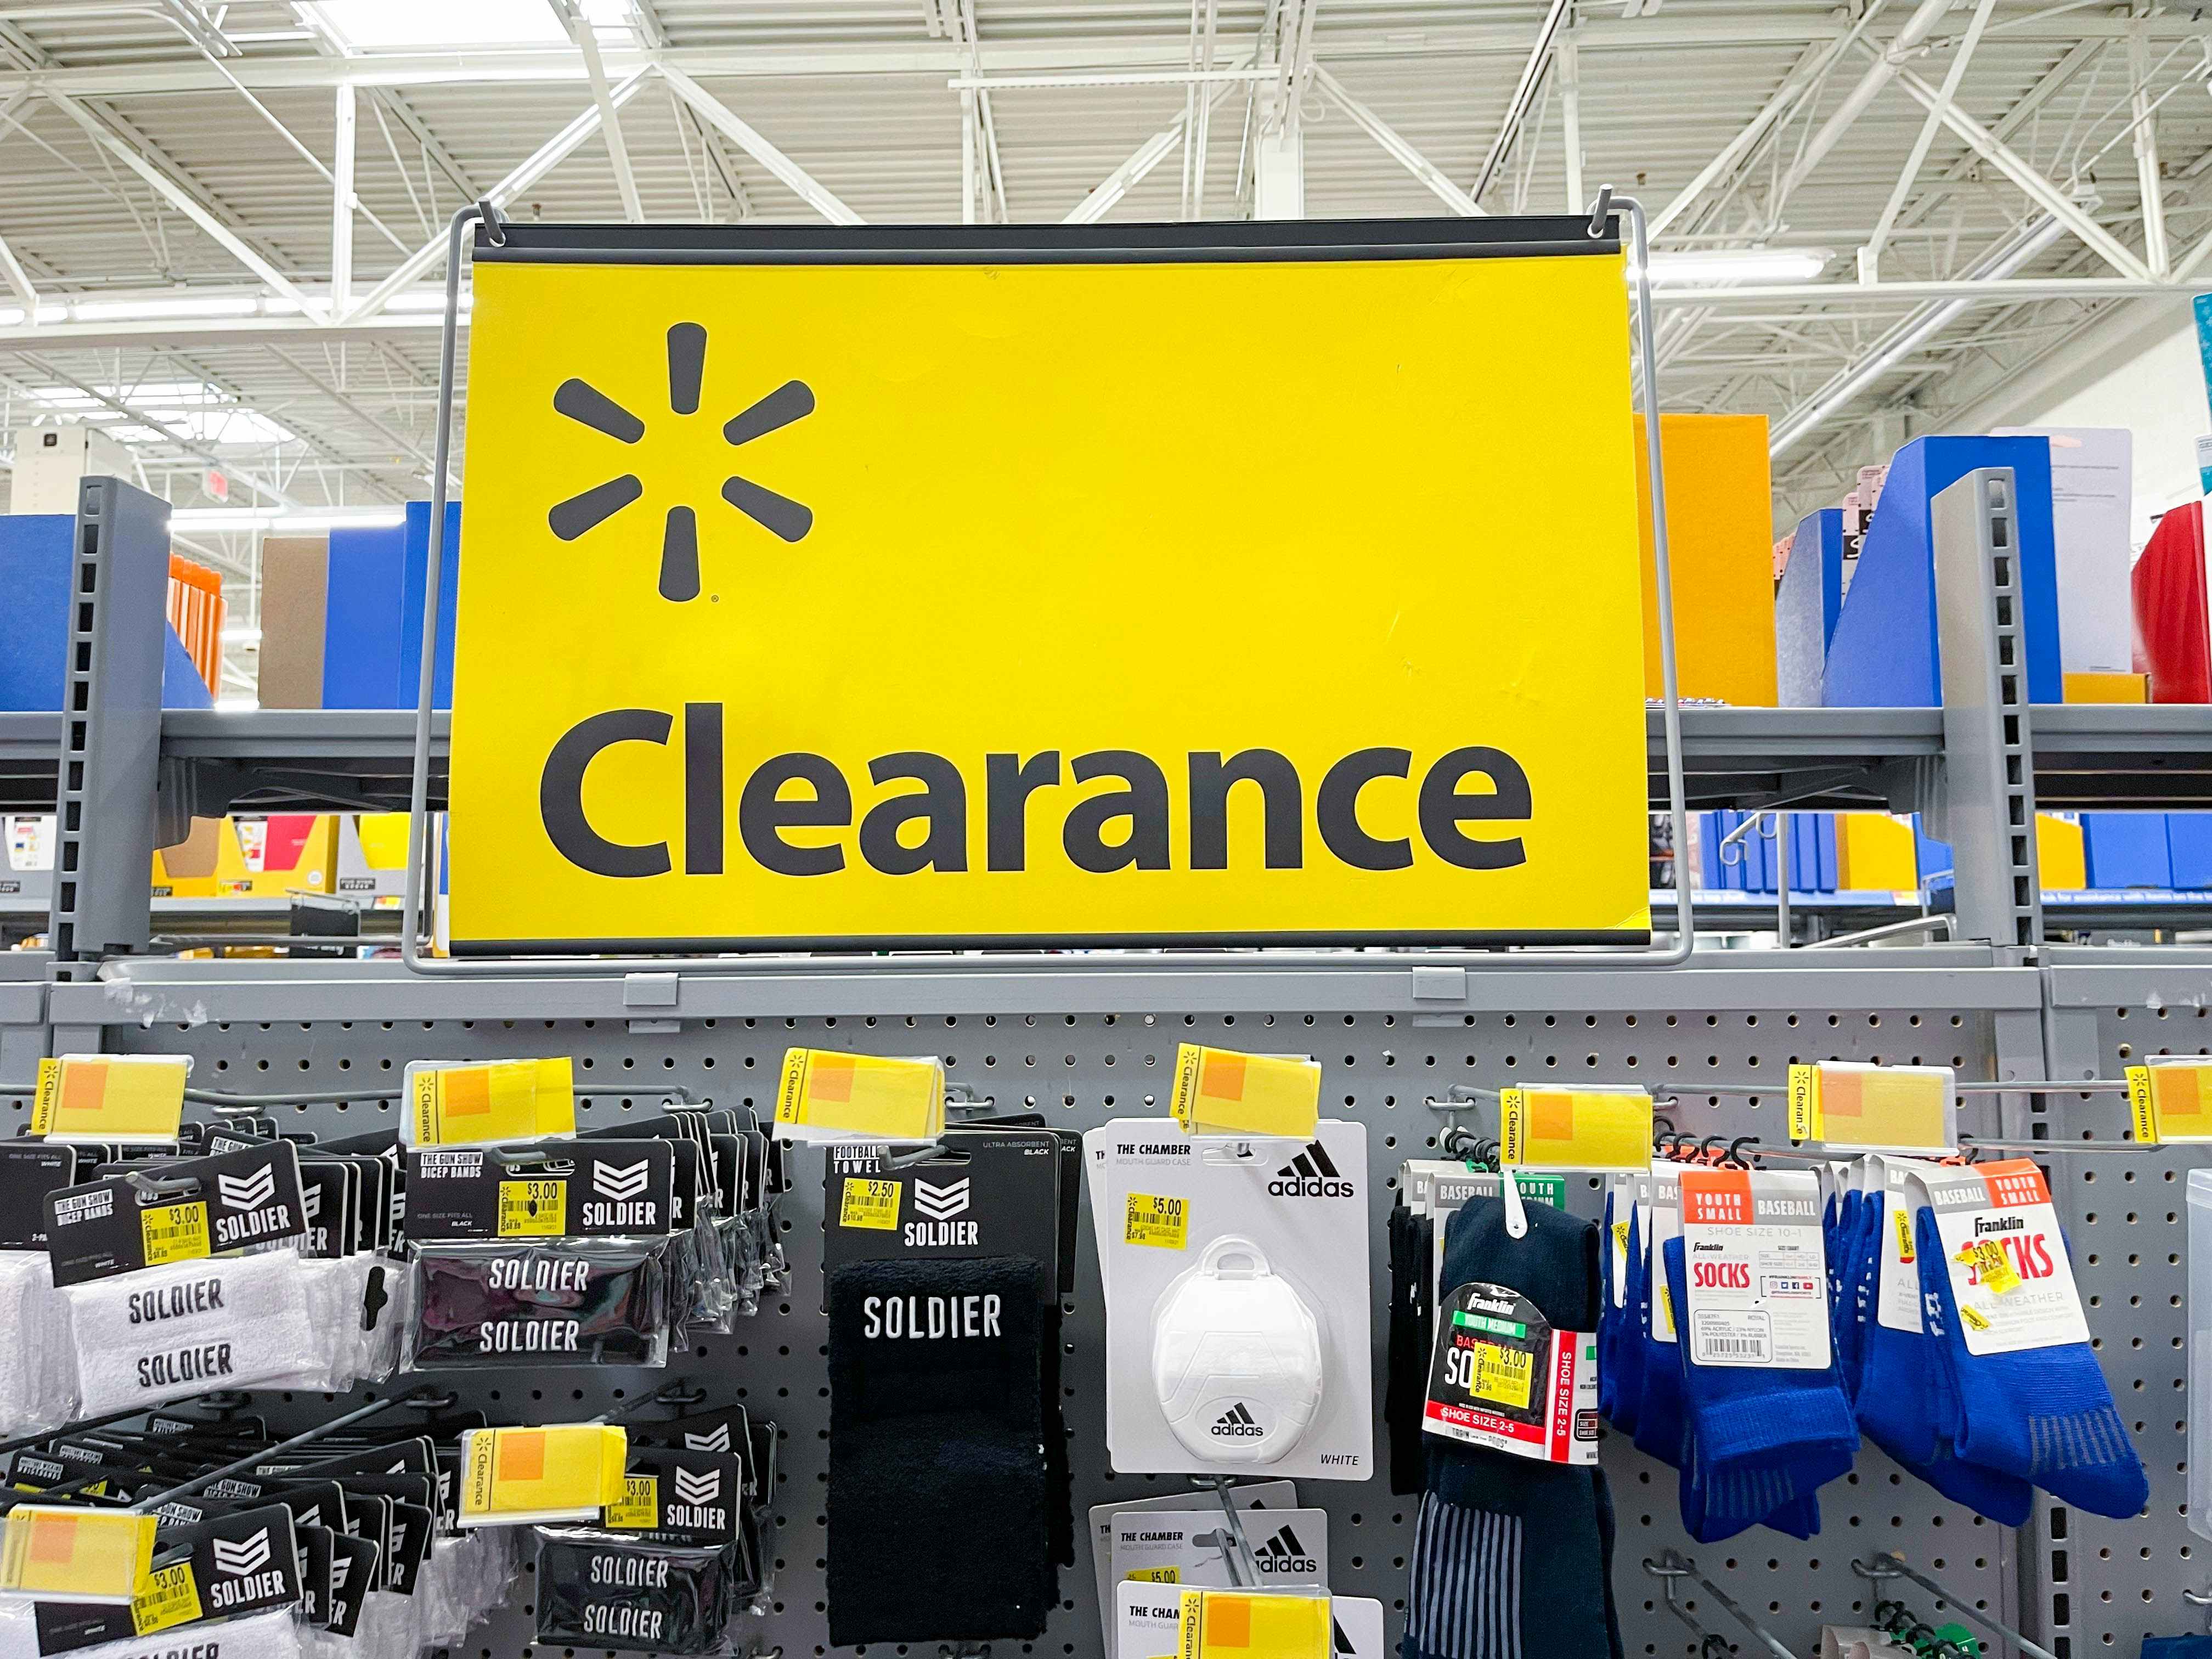 Outlet: Discovering Hidden Clearance Bargains